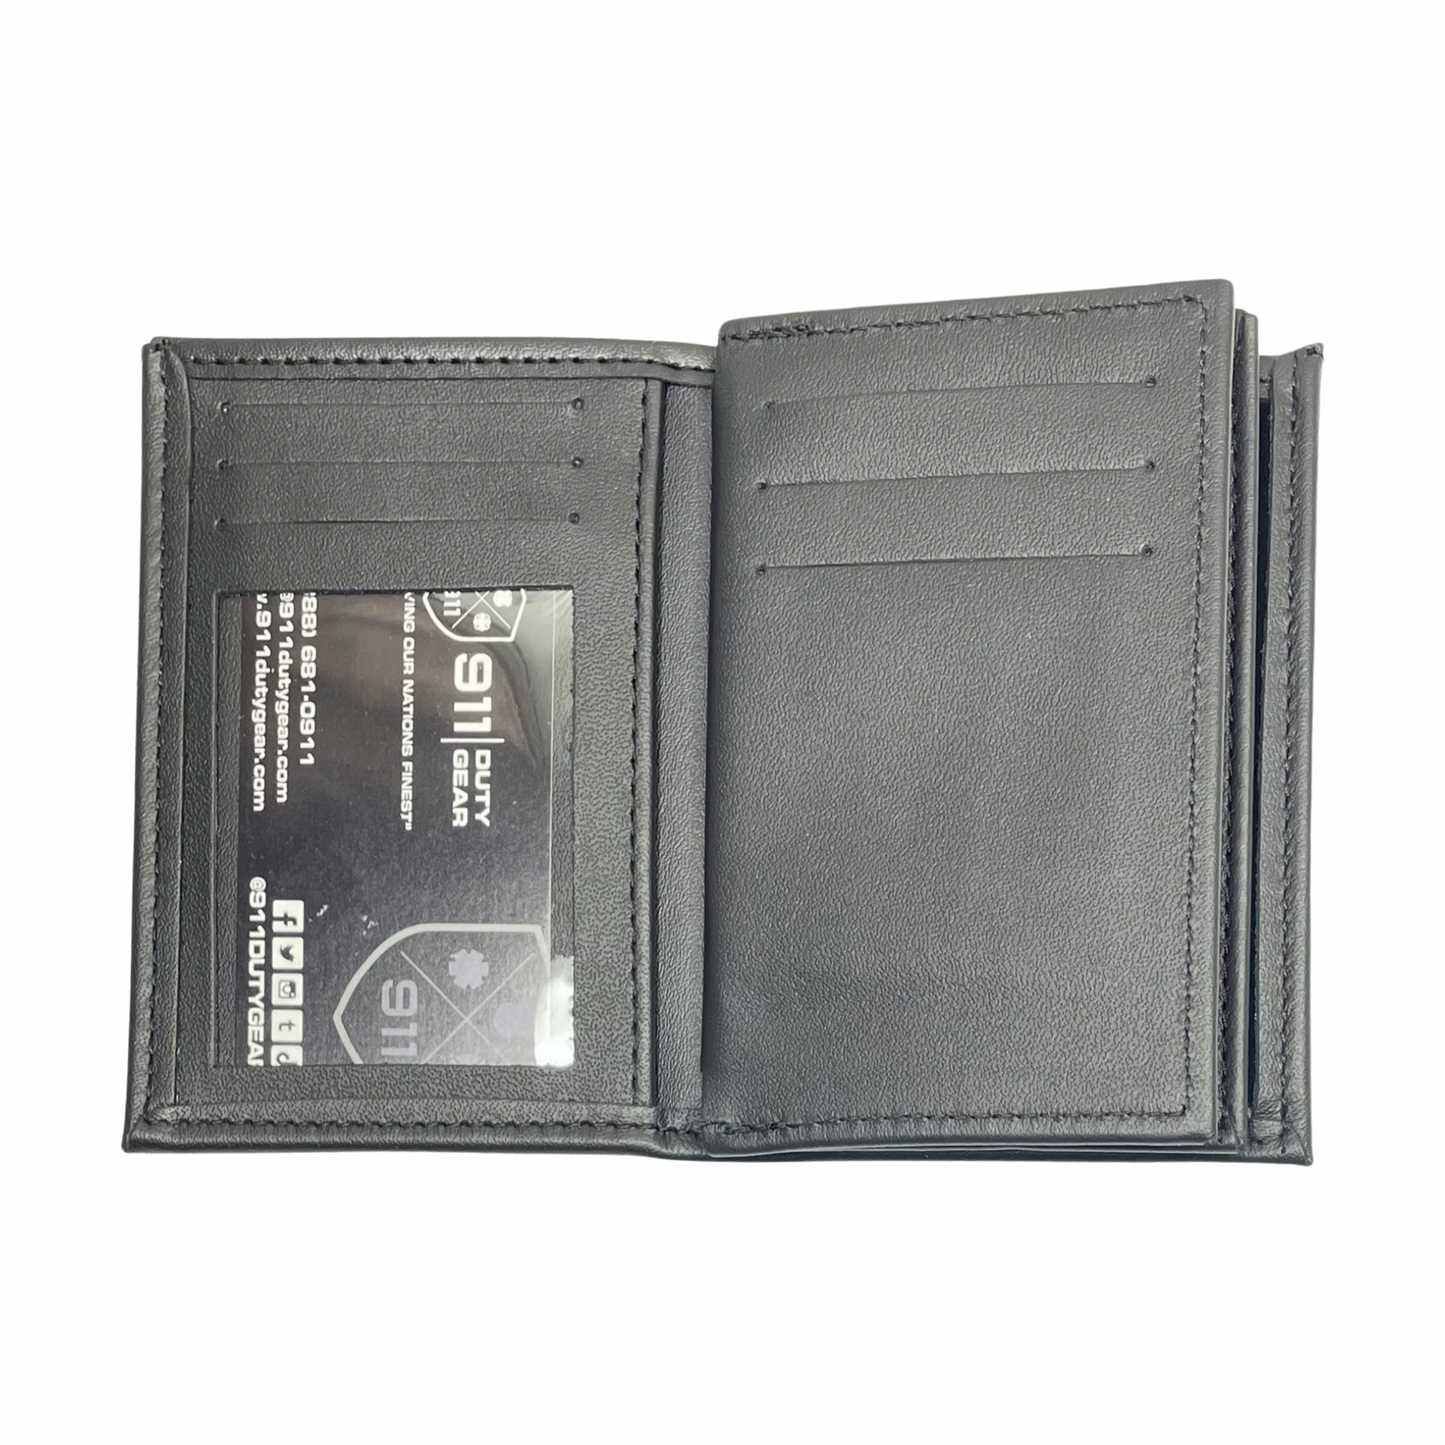 FBOP | Federal Bureau of Prisons Horizontal Bifold Double ID Credential & Hidden Badge Wallet-Perfect Fit-911 Duty Gear USA